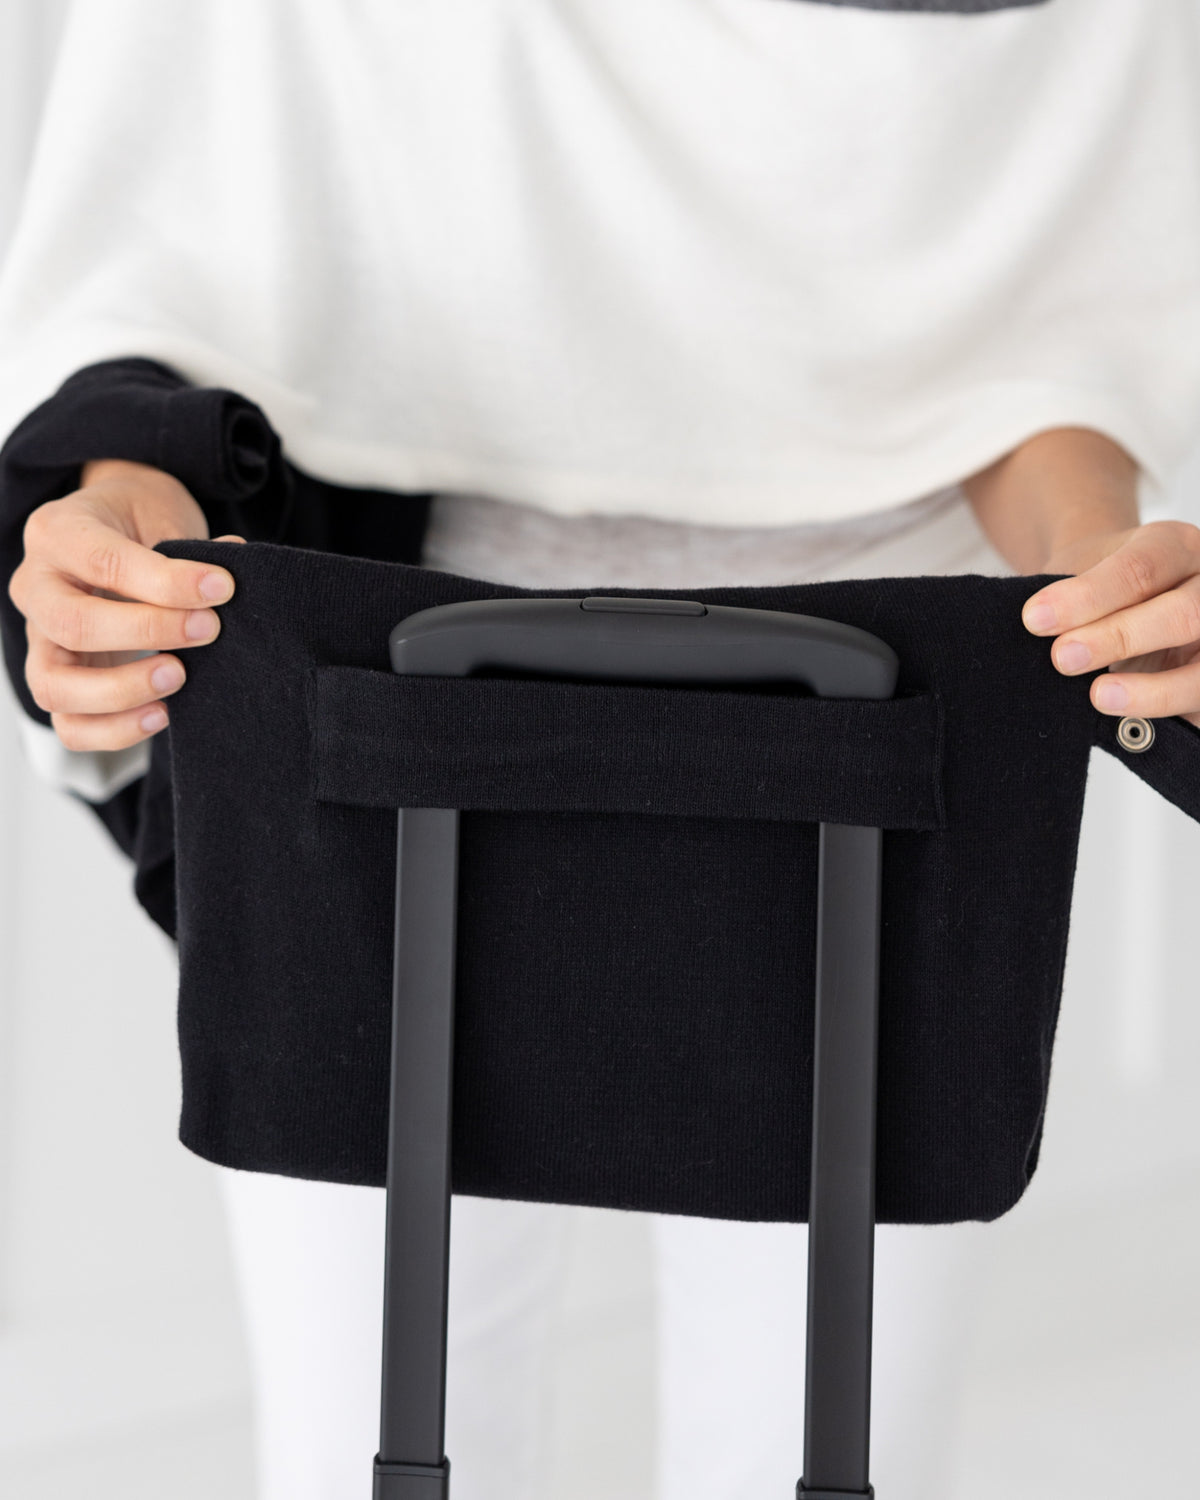 Woman placed Black Carry Pouch that can hold the Dreamsoft Travel Scarf over handle on suitcase